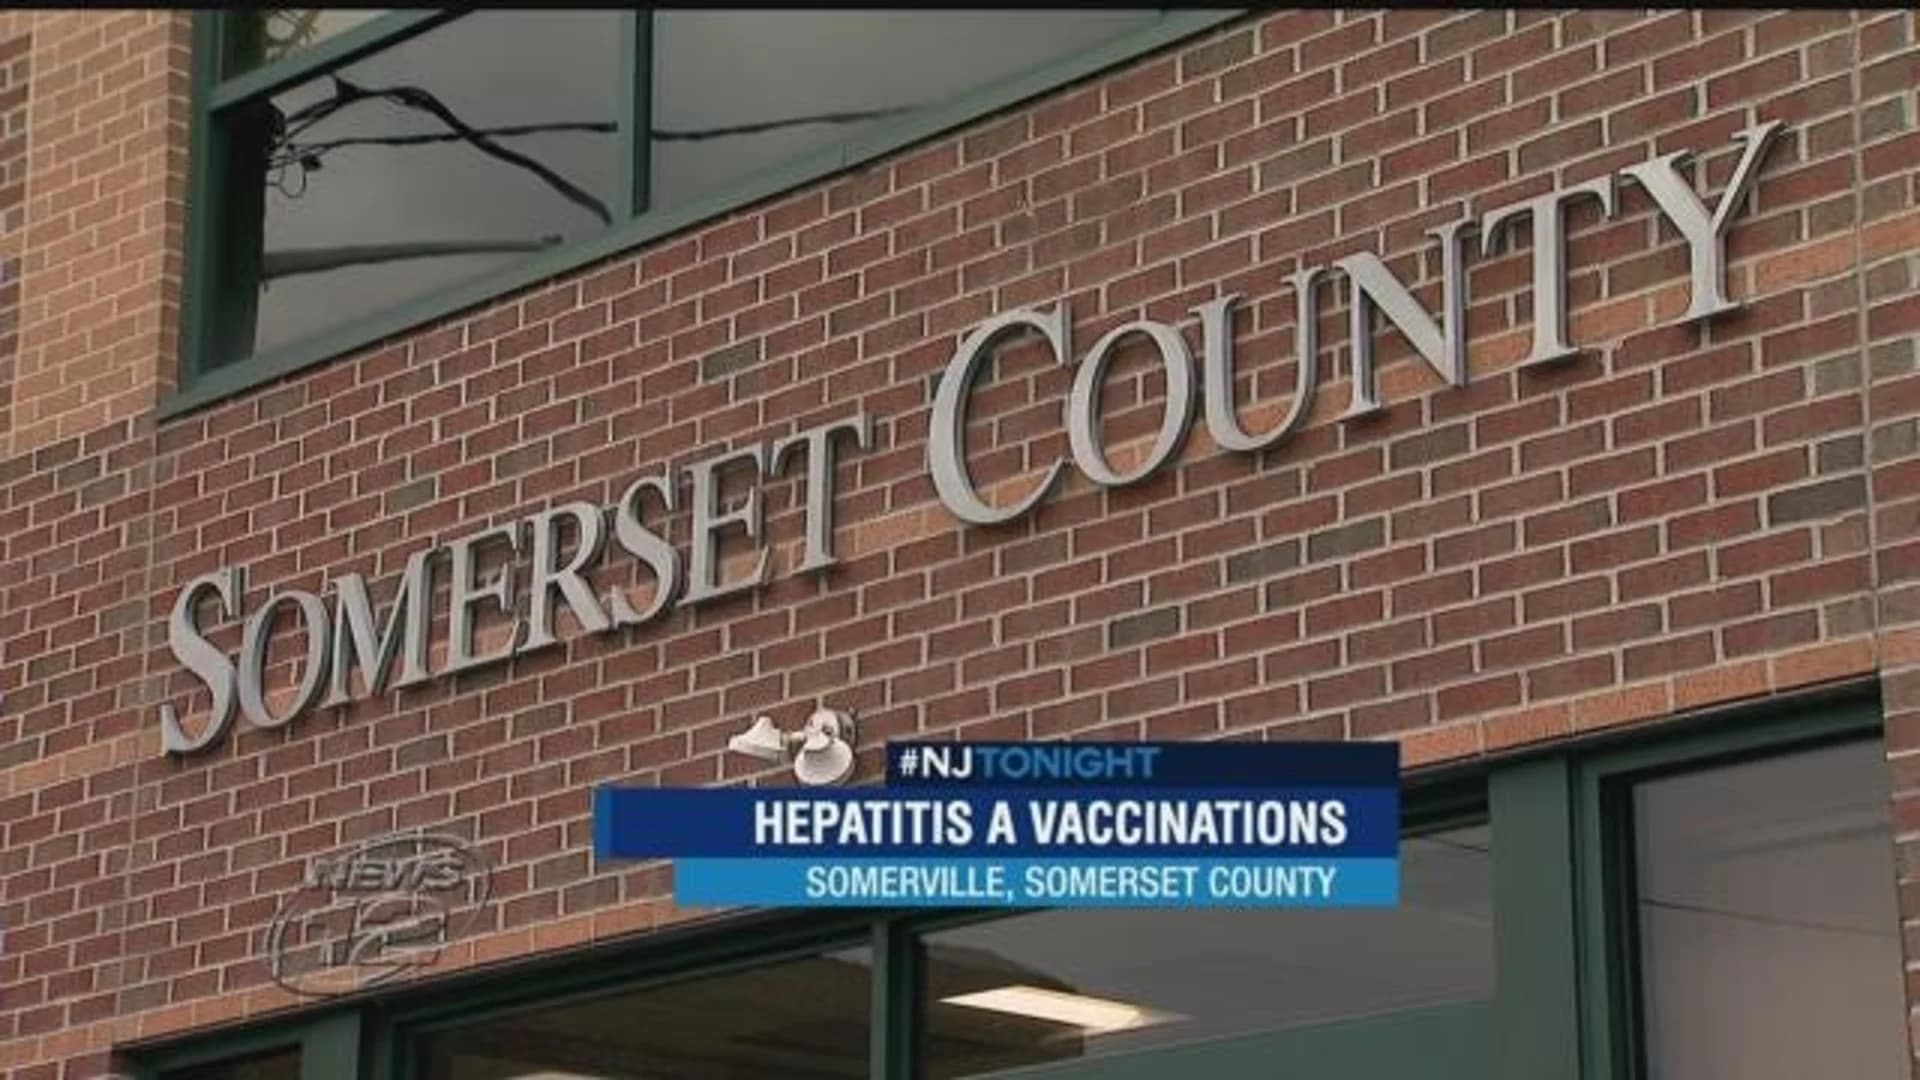 Somerset County Health Dept. runs out of hepatitis A vaccine 2nd day in a row